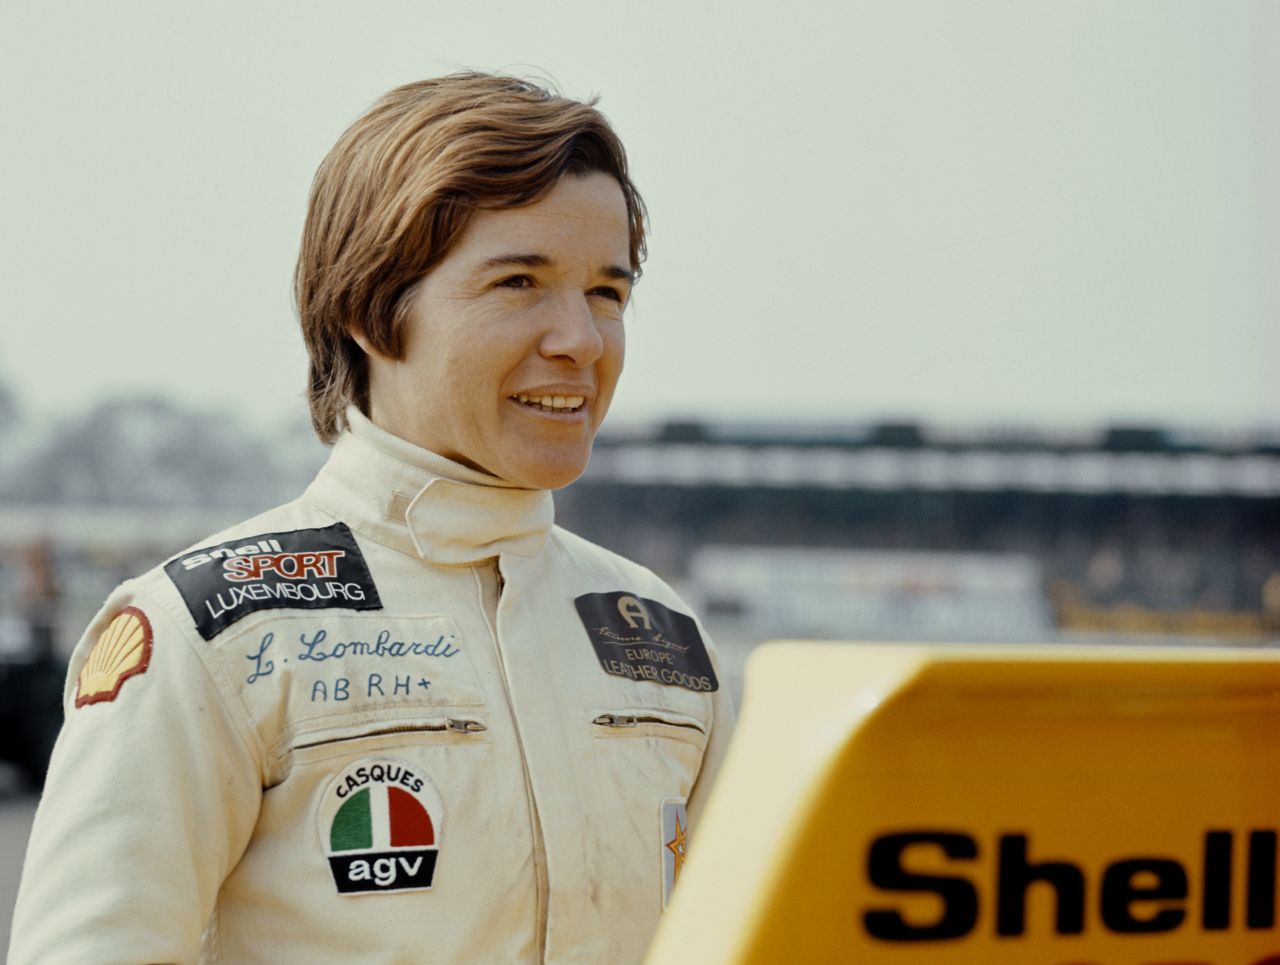 In 1975, Lella Lombardi became the first and only female driver to earn points in a grand prix. She finished sixth and scored a point at the Spanish Grand Prix, but the race was halted after 29 laps due to a major crash and drivers were awarded half points.